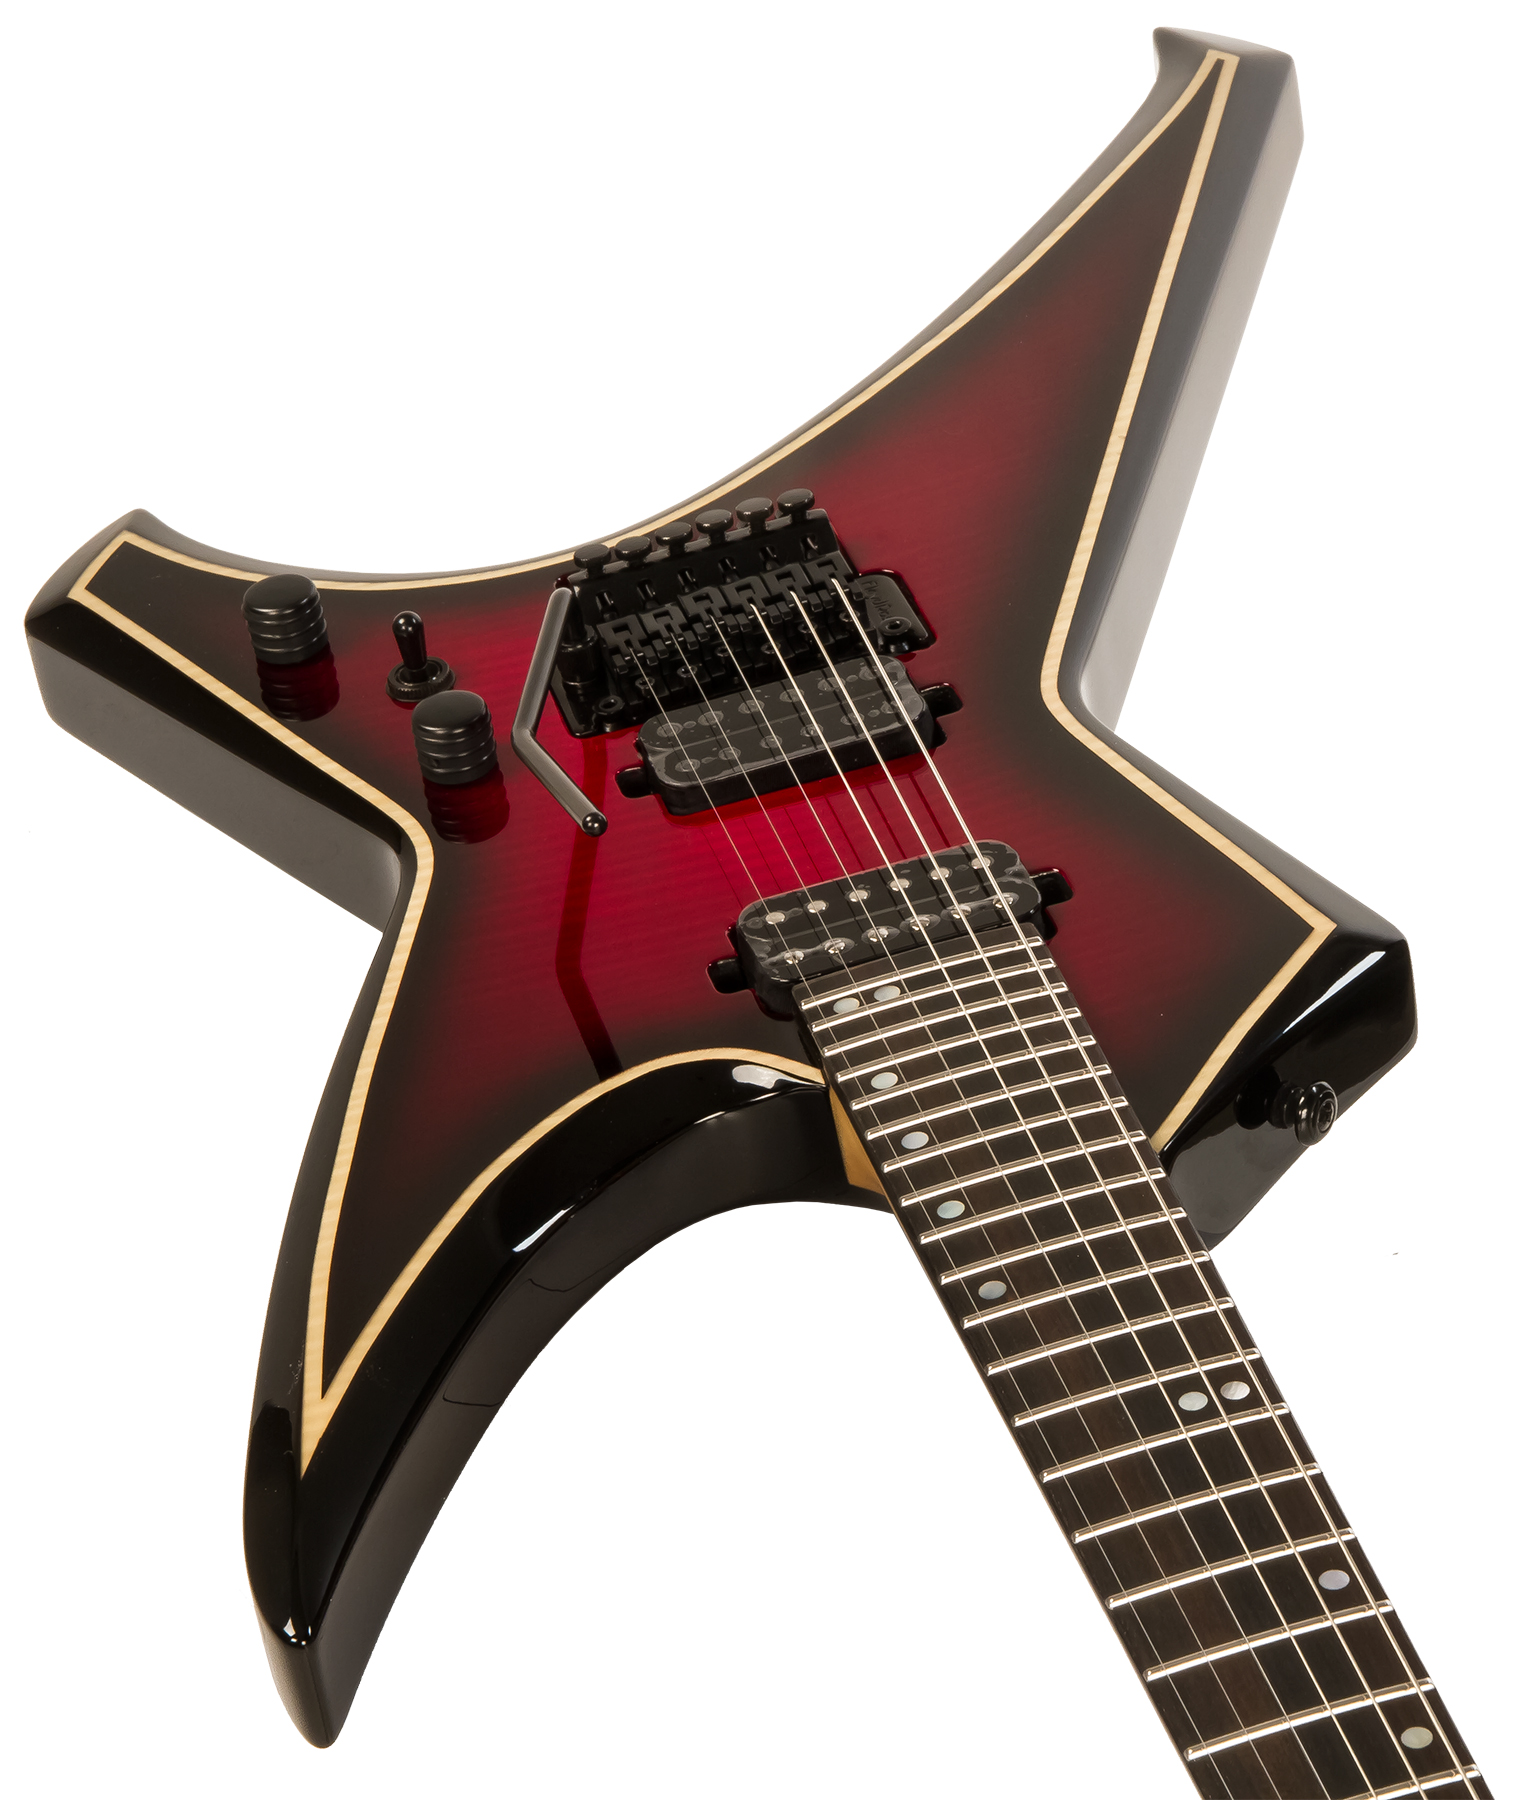 Ormsby Metal X 6 Hh Fr Eb - Red Dead - Metal electric guitar - Variation 2